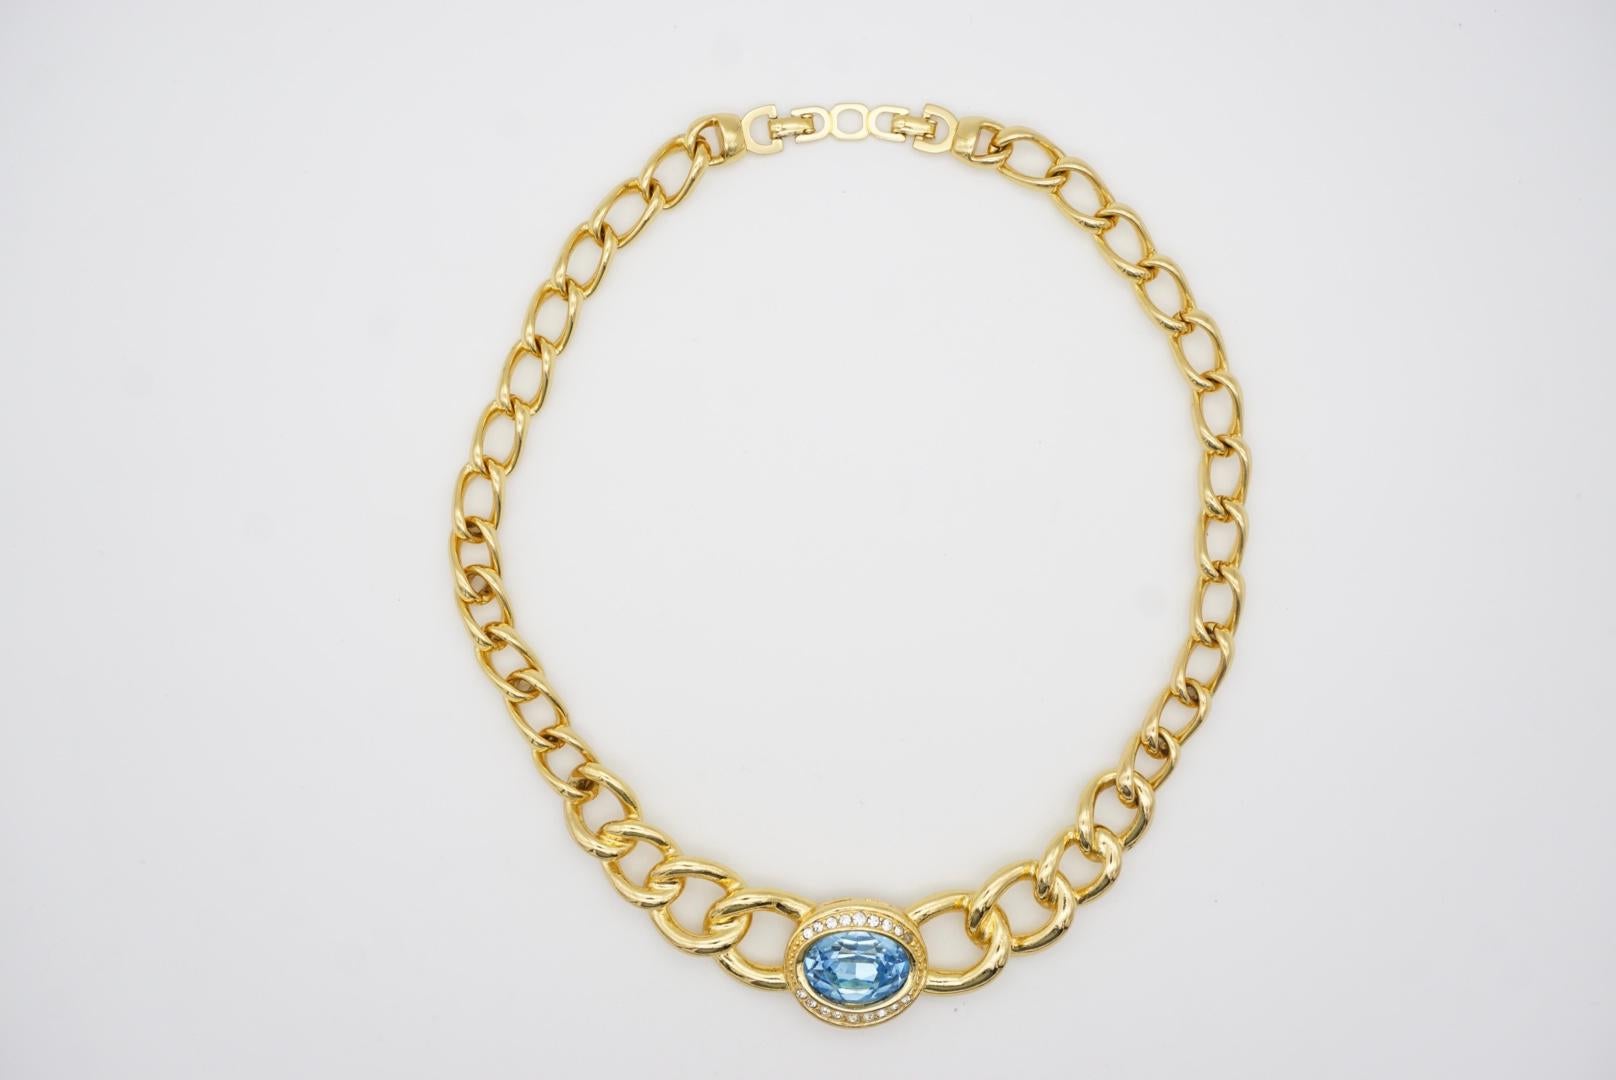 Christian Dior Vintage 1990s Aqua Blue Oval Crystal Chunky Gold Choker Necklace  For Sale 1